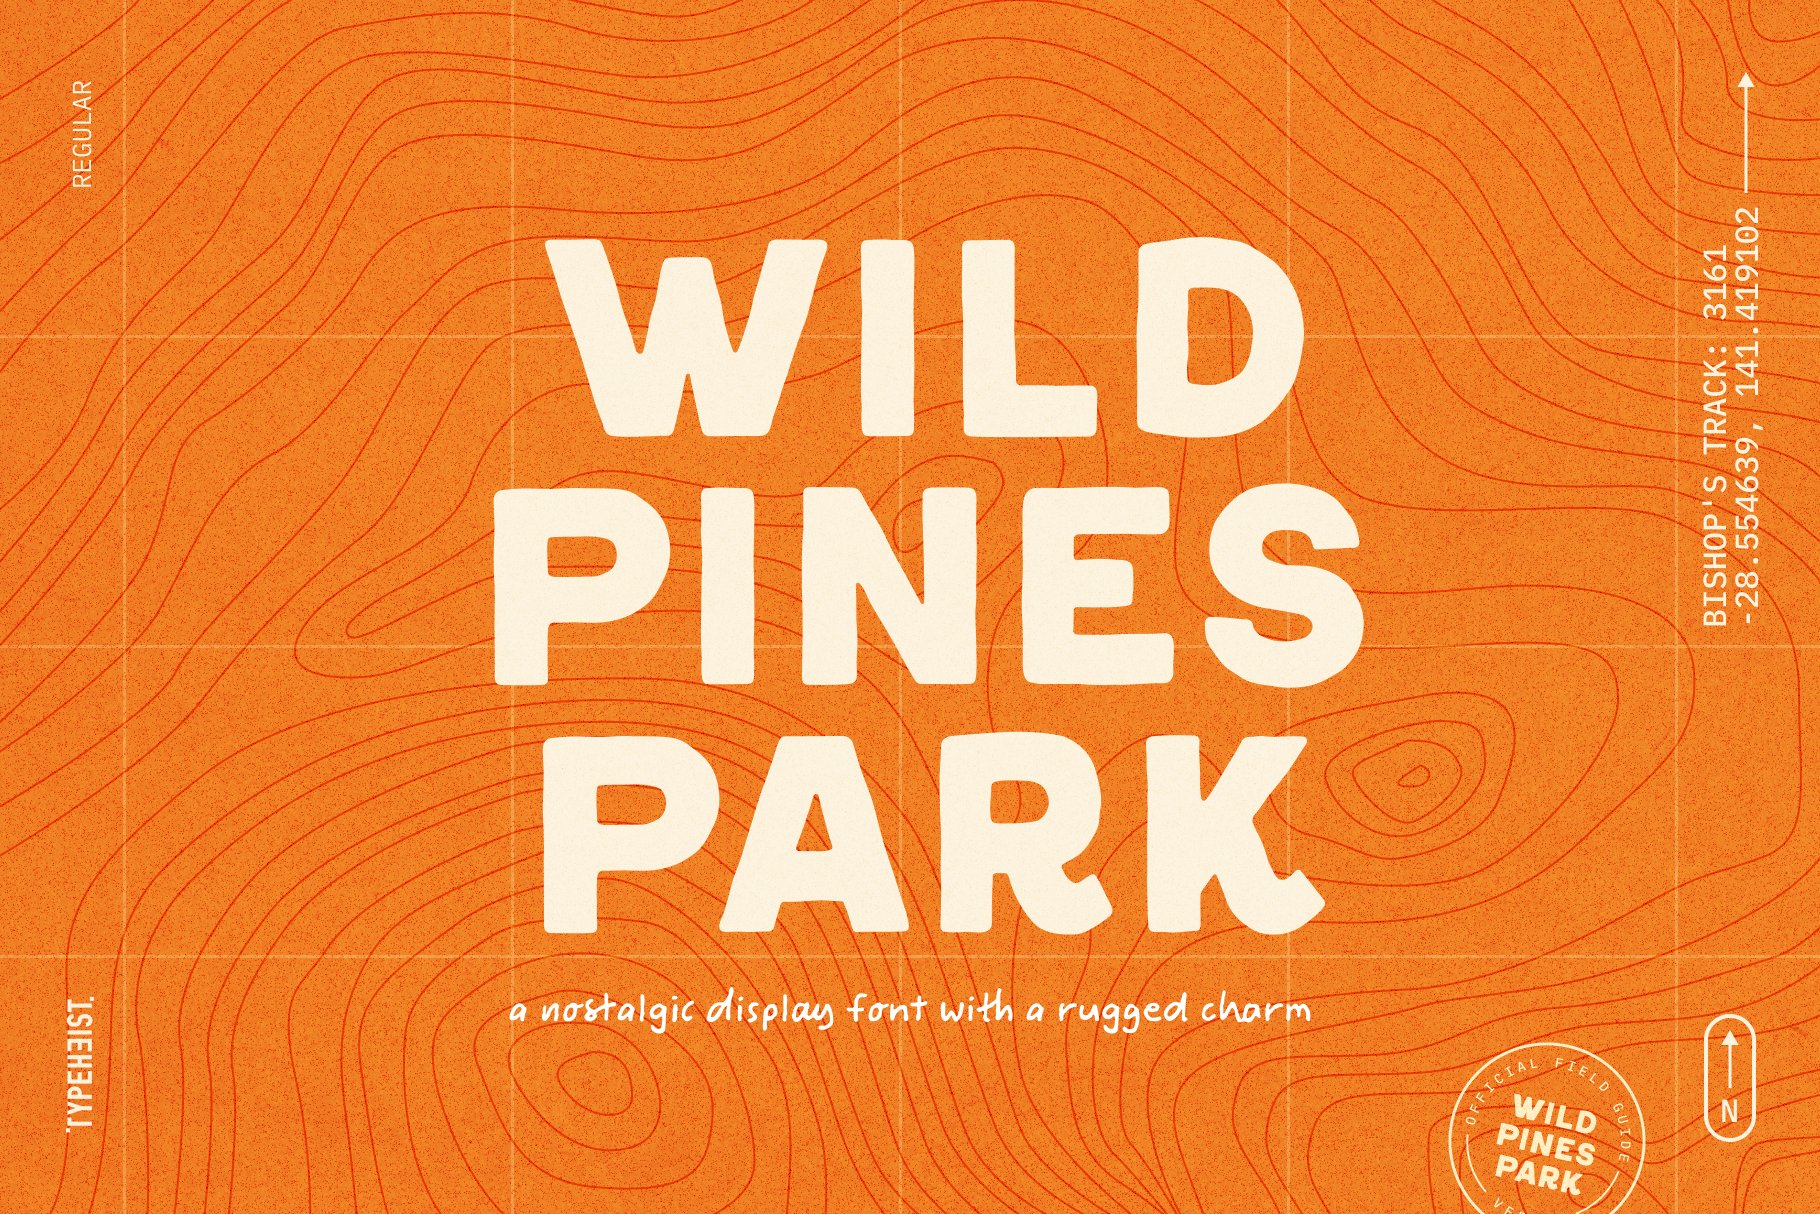 Wild Pines Park: A nostalgic display font with a rugged charm 